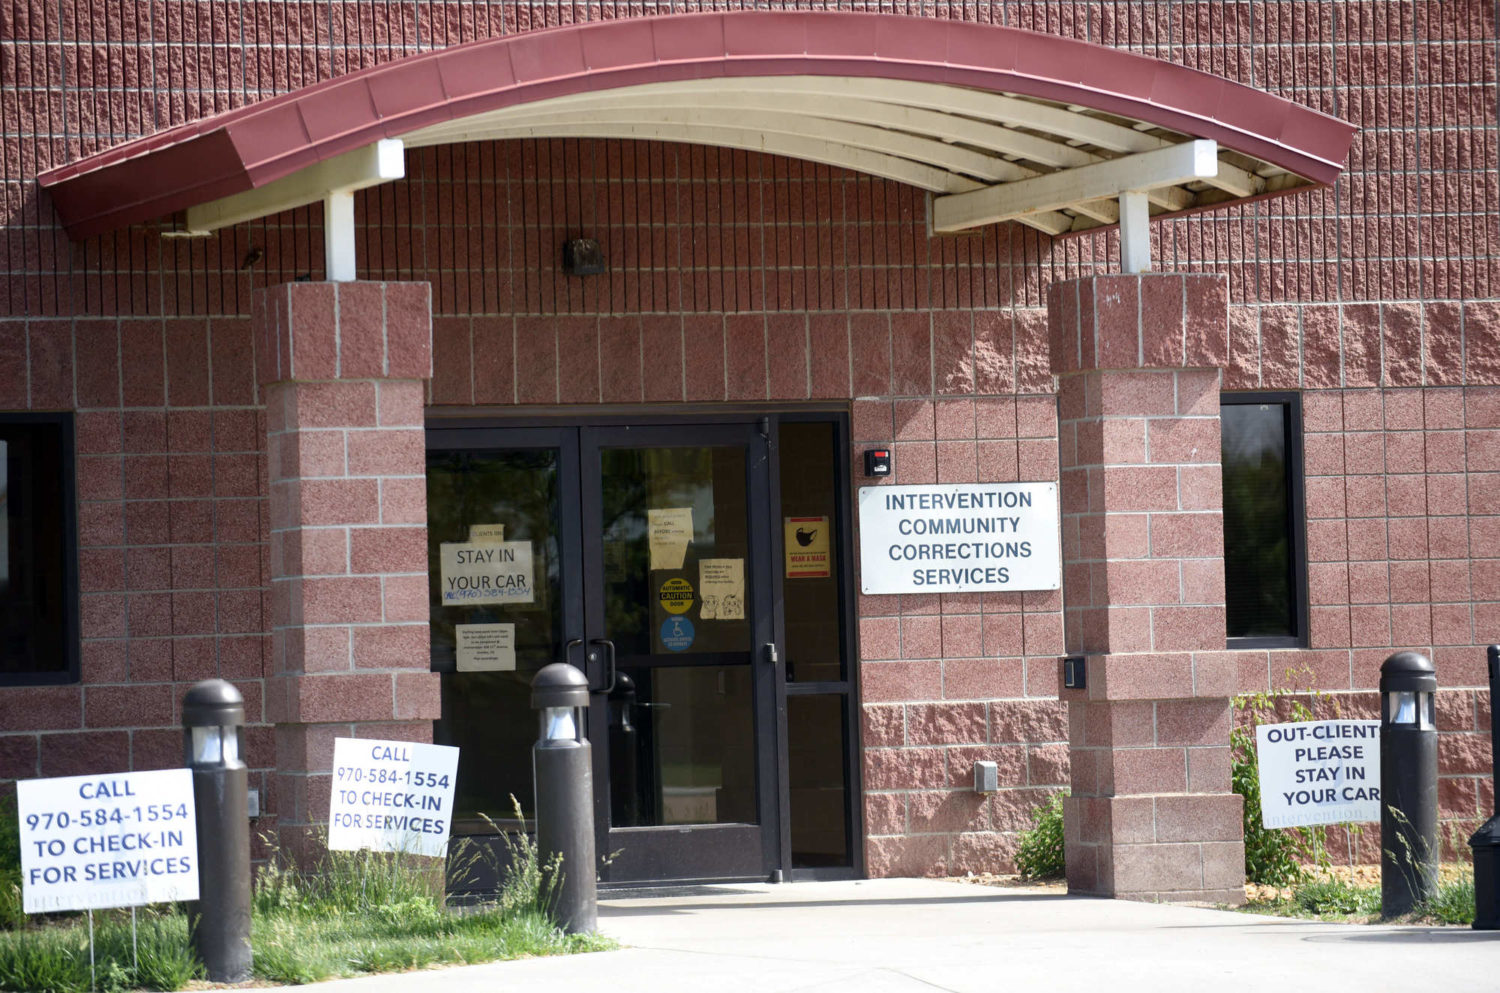 Signage surrounds the entrance to the Weld County Intervention Community Correction Services, 1101 H St.